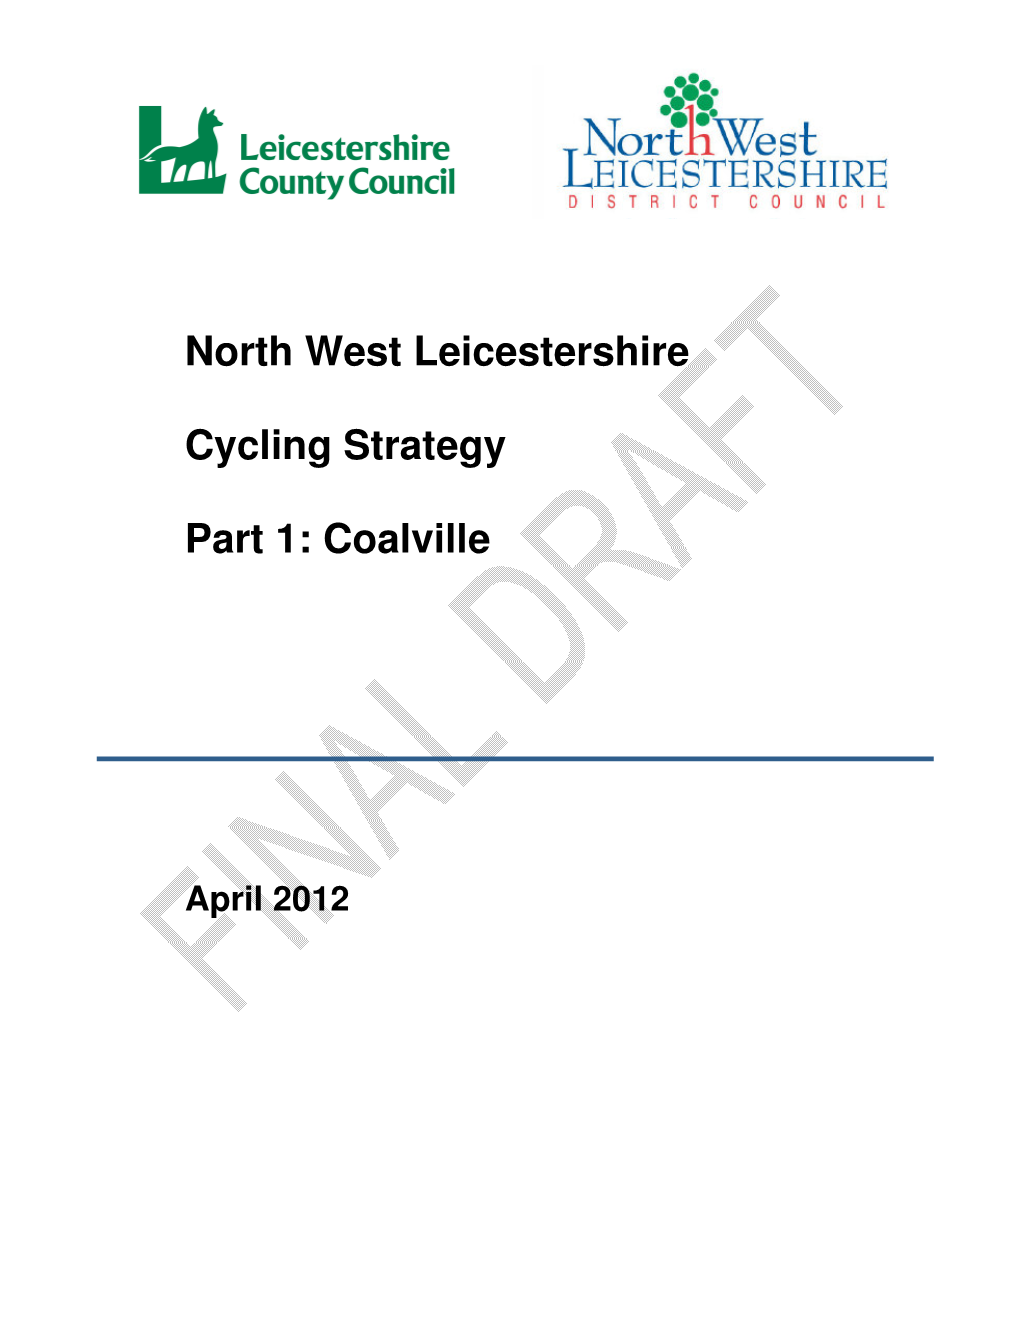 North West Leicestershire Cycling Strategy Part 1: Coalville